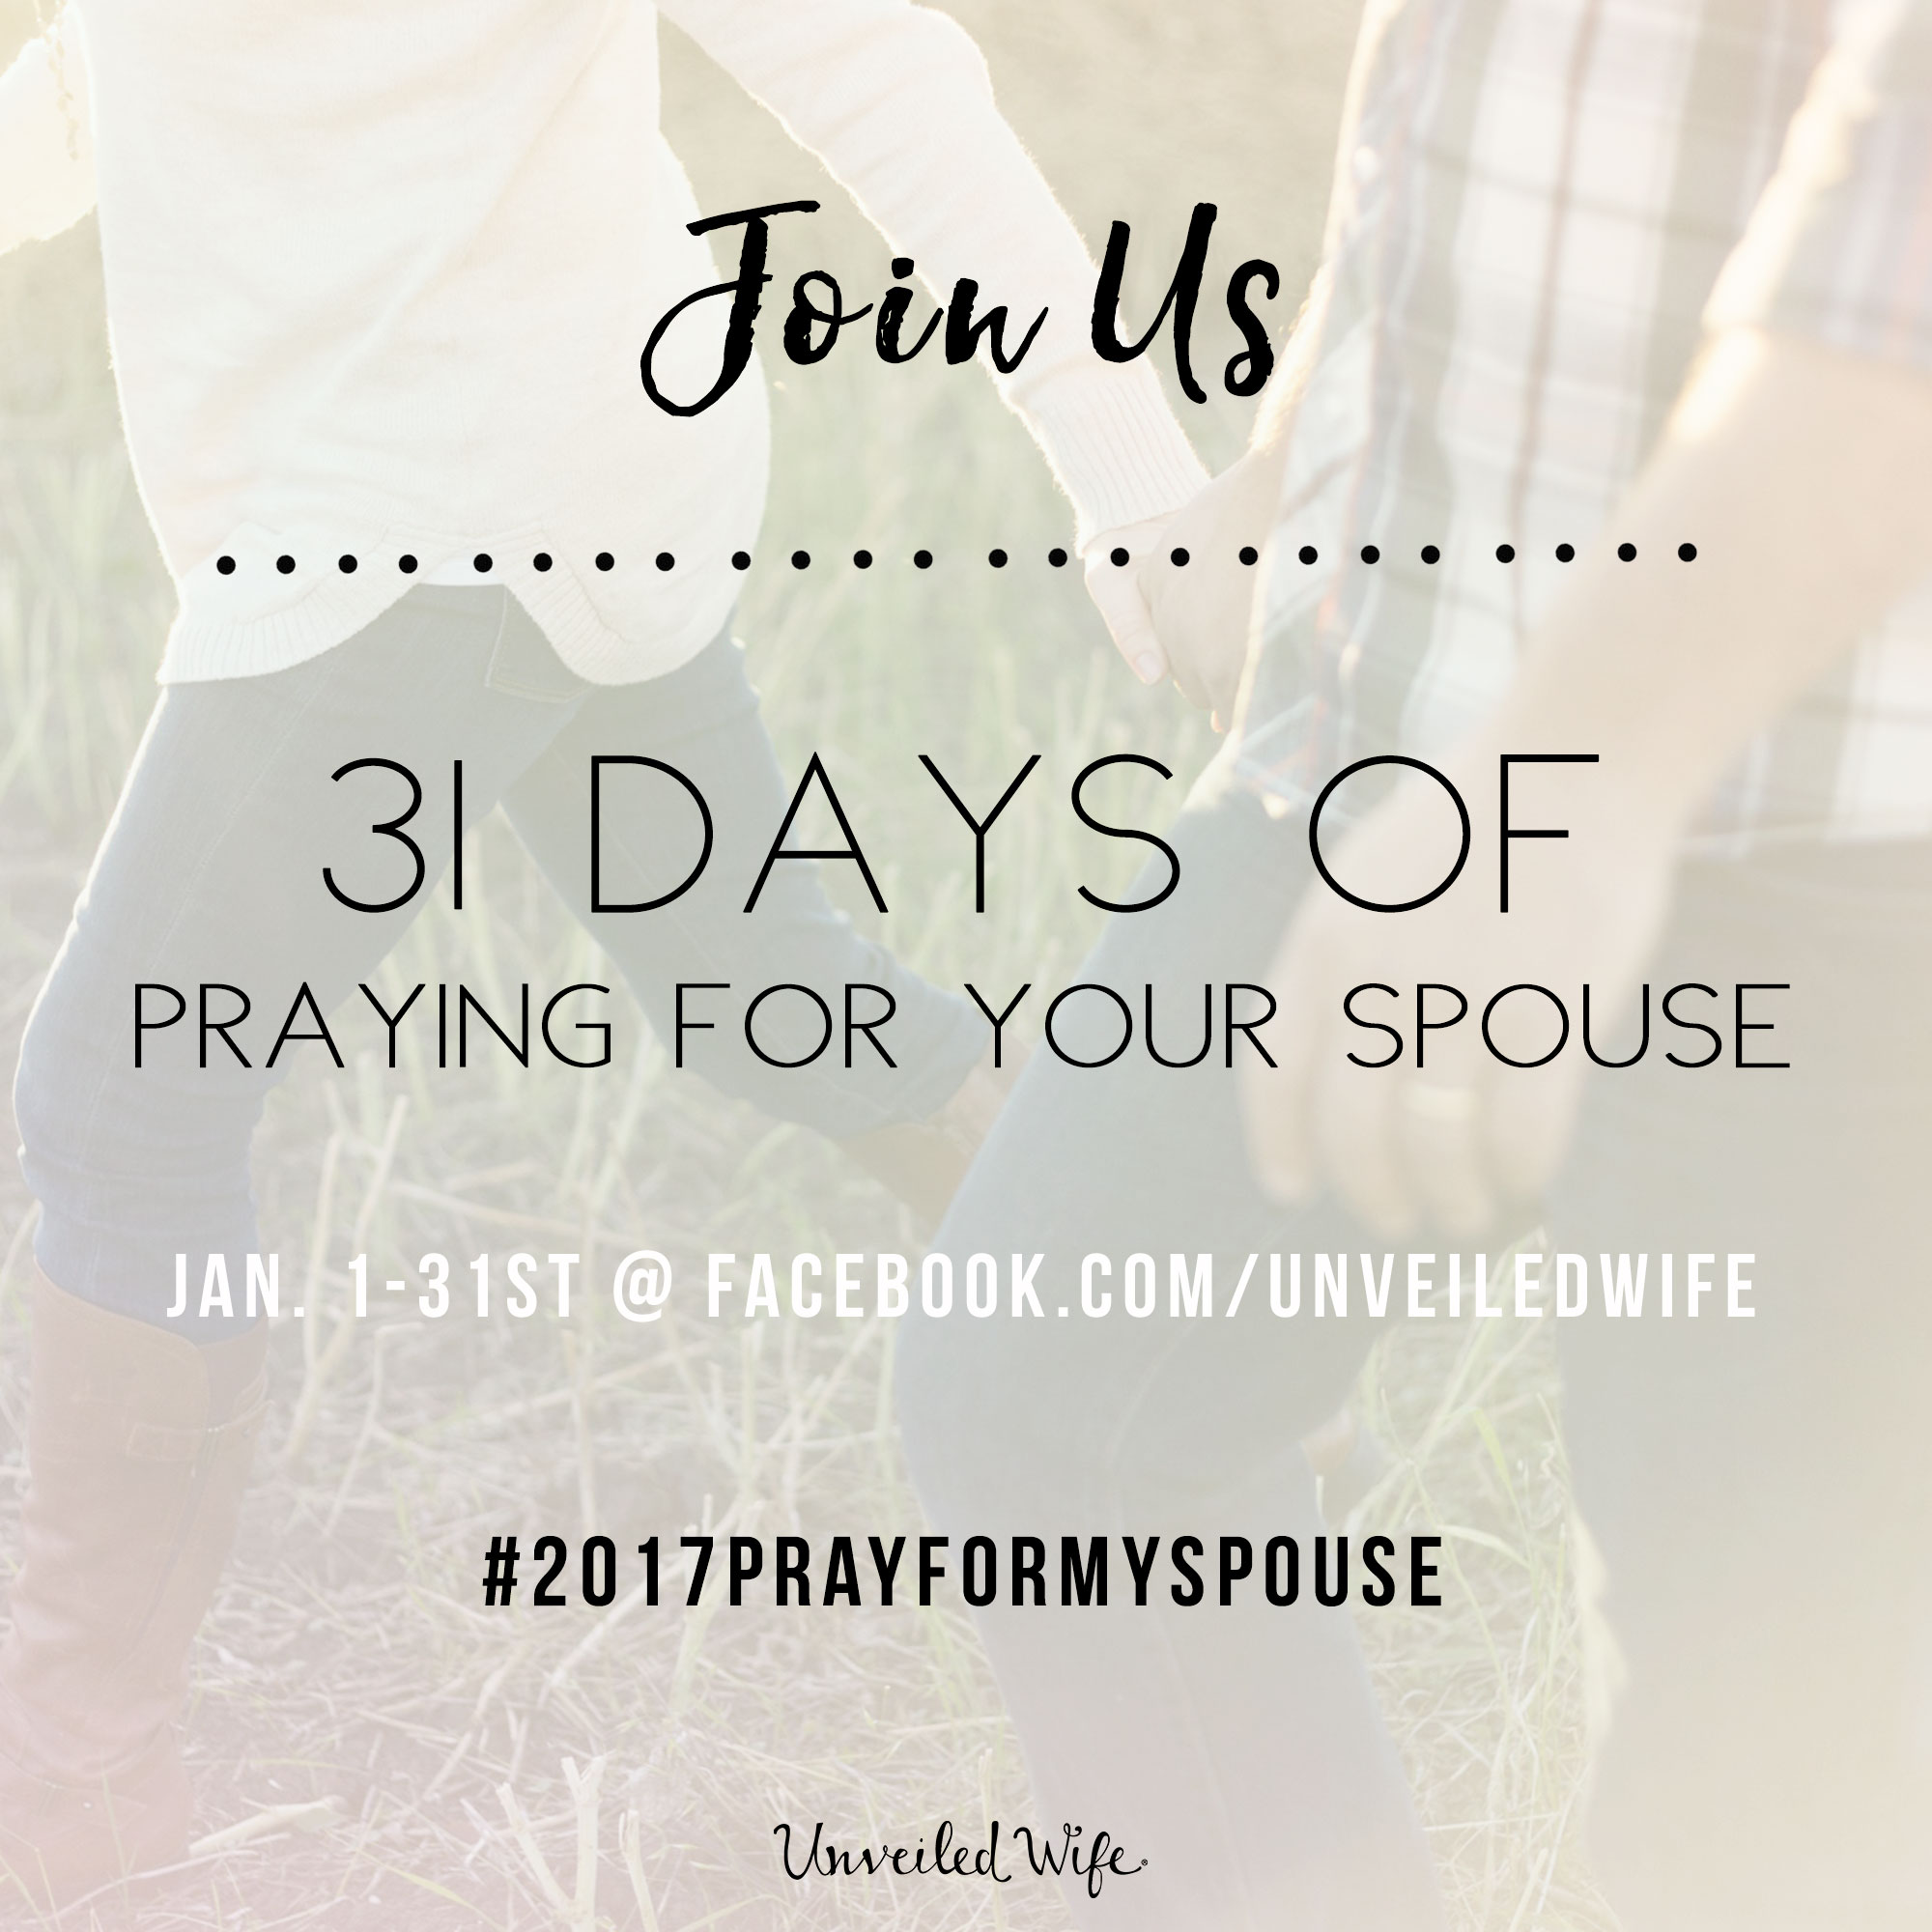 31 Days Of Praying For Your Spouse Challenge